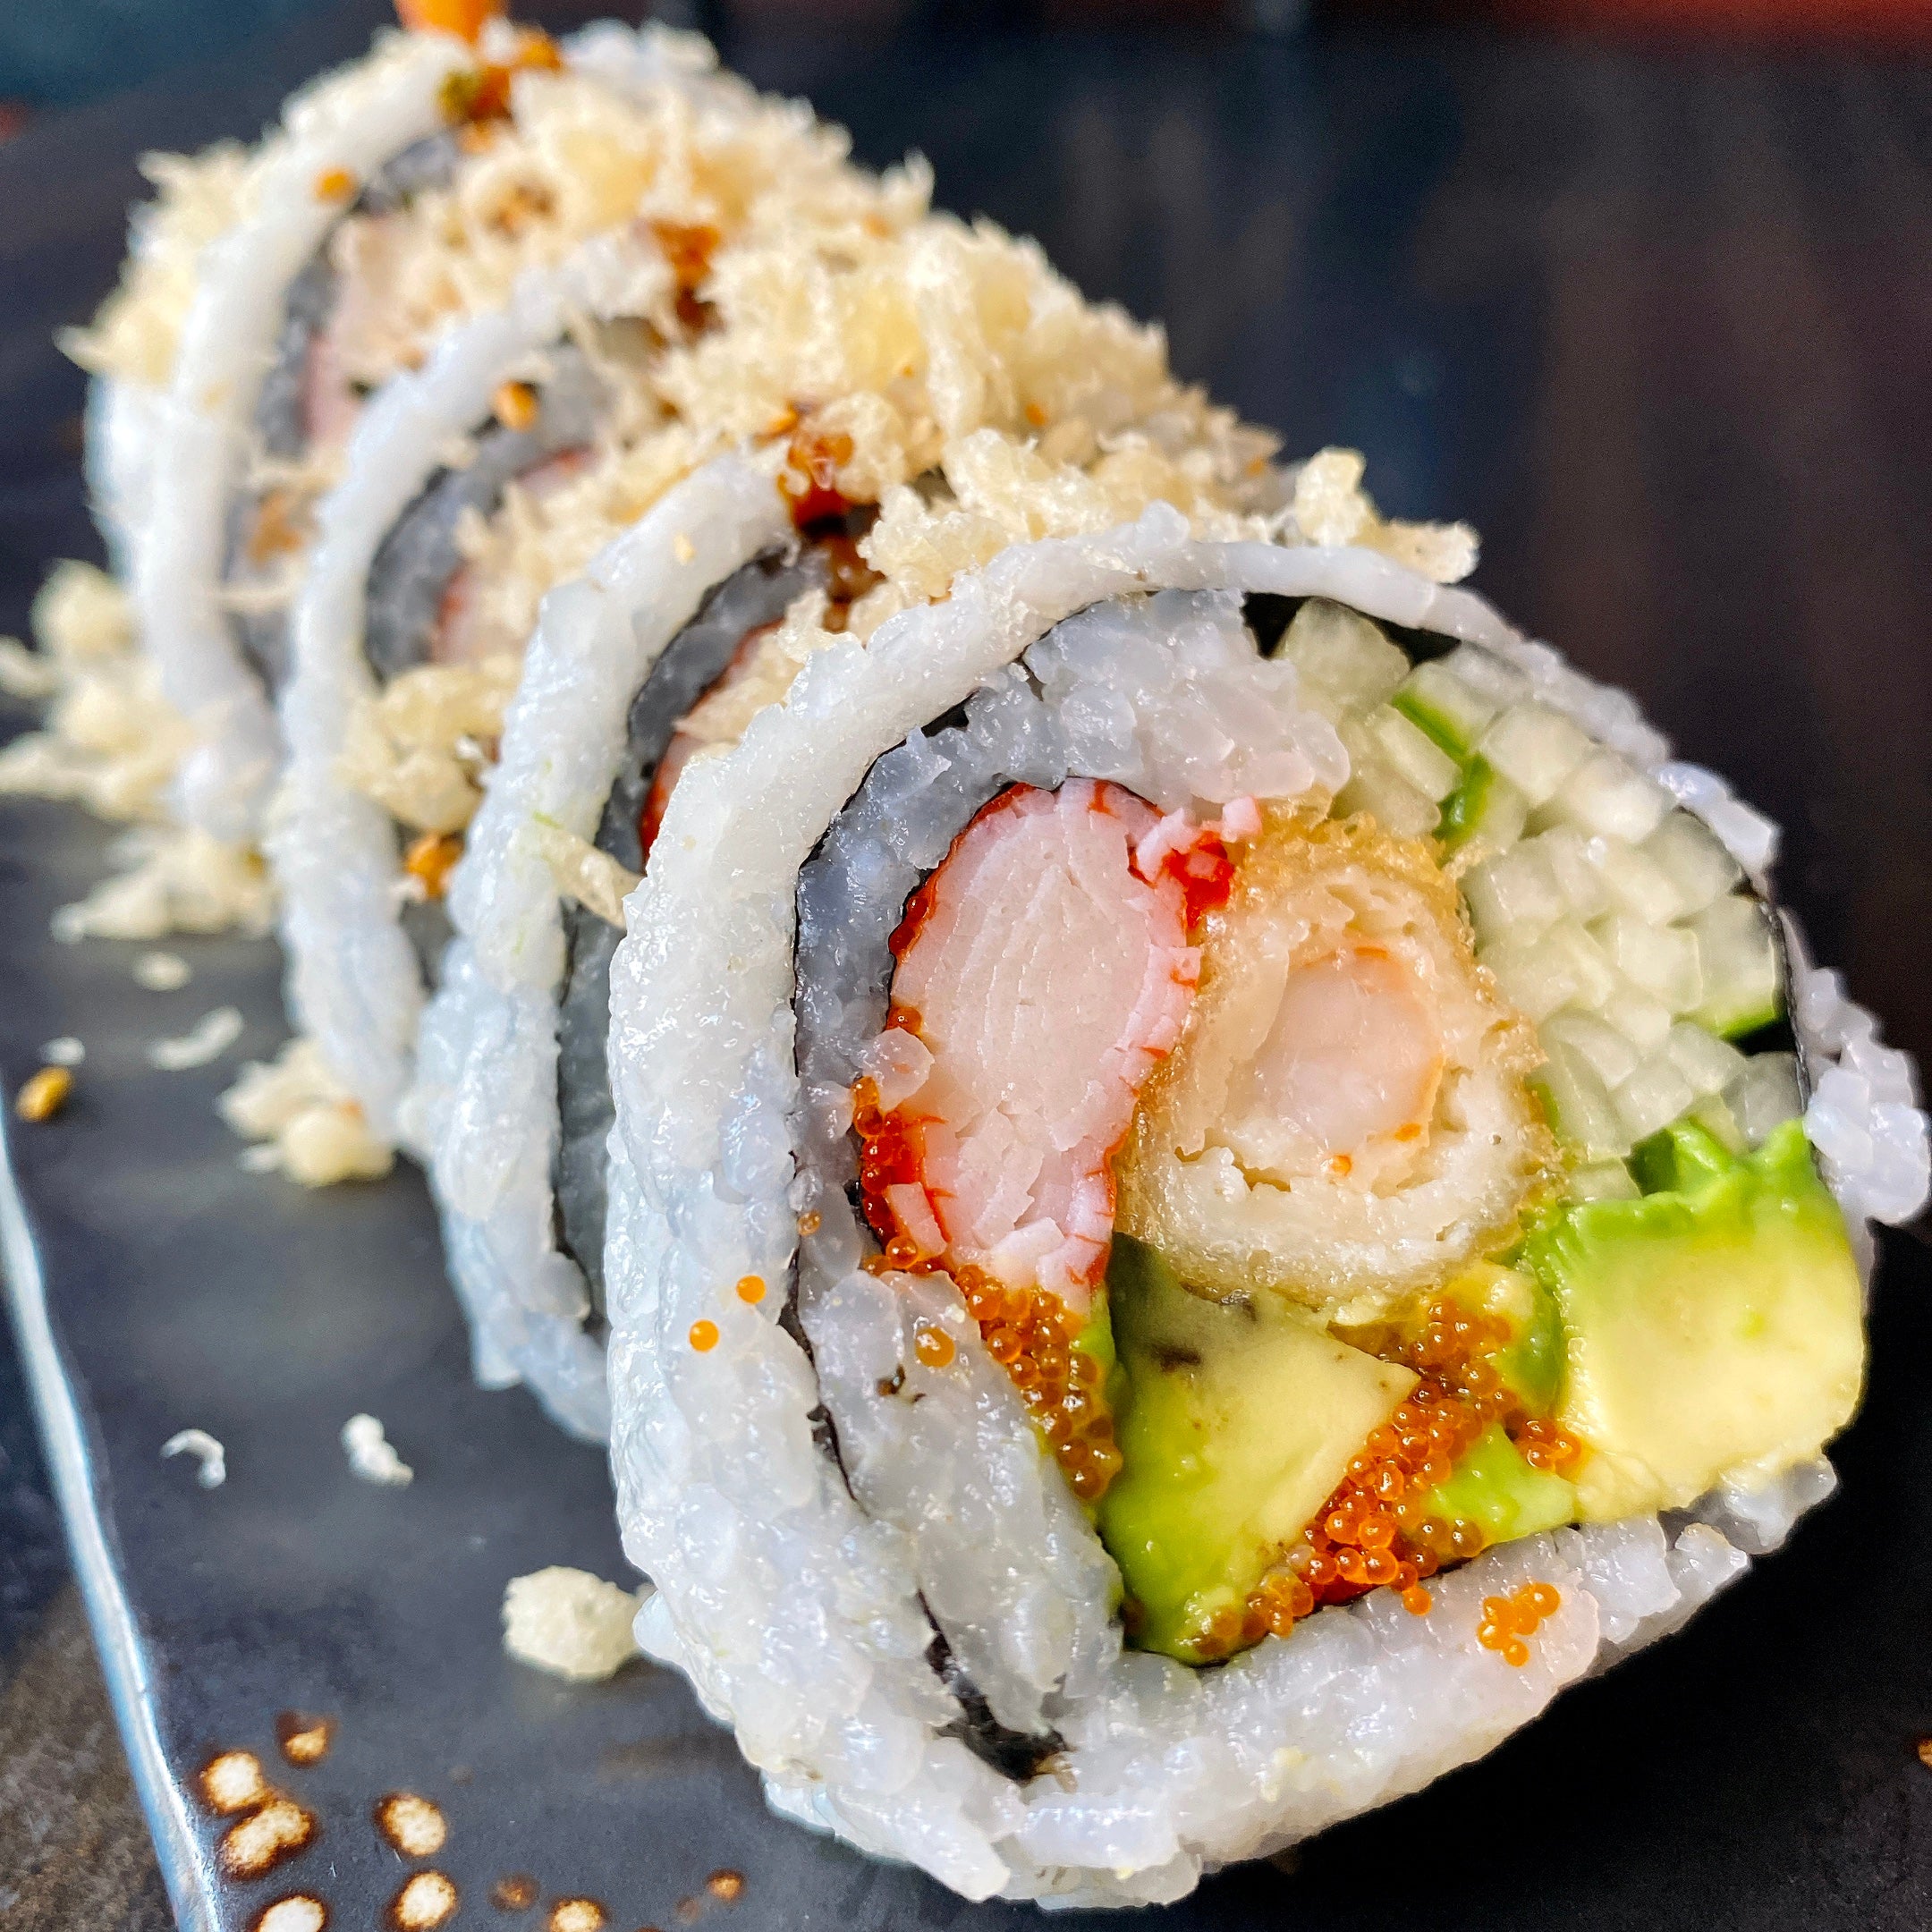 THE CLASSIC DYNAMITE ROLL